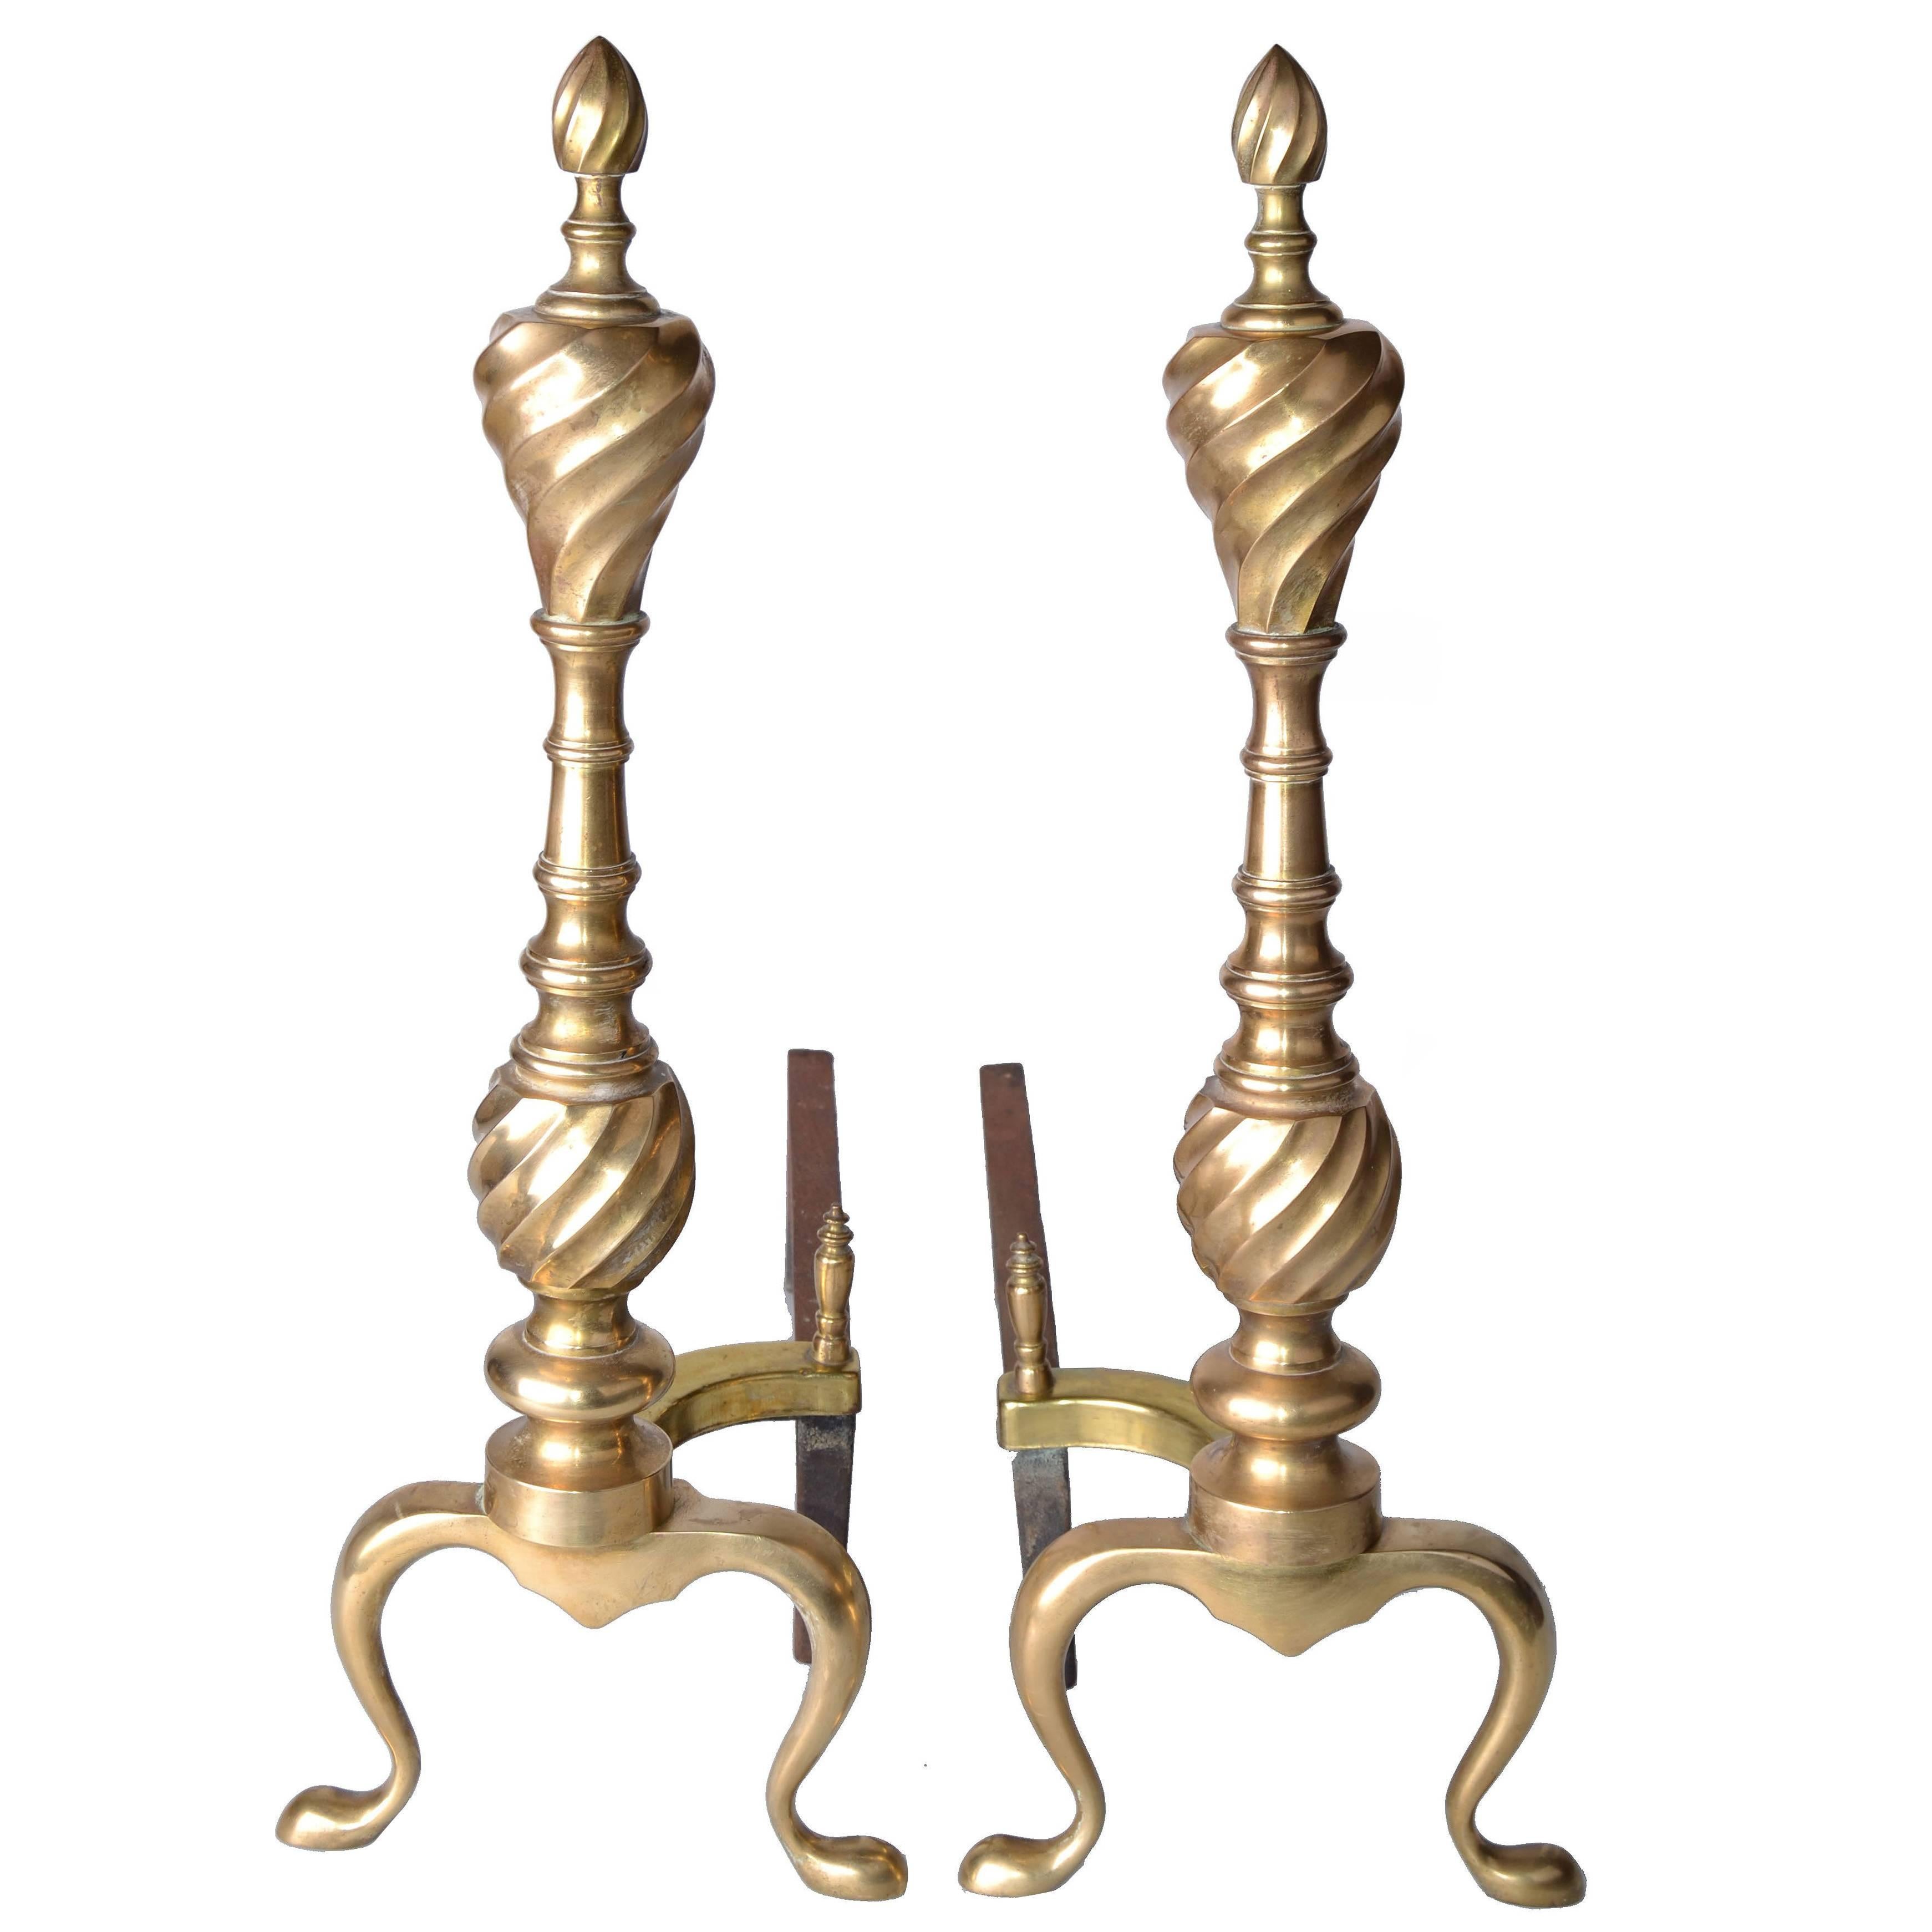 Pair of Solid Brass Andirons